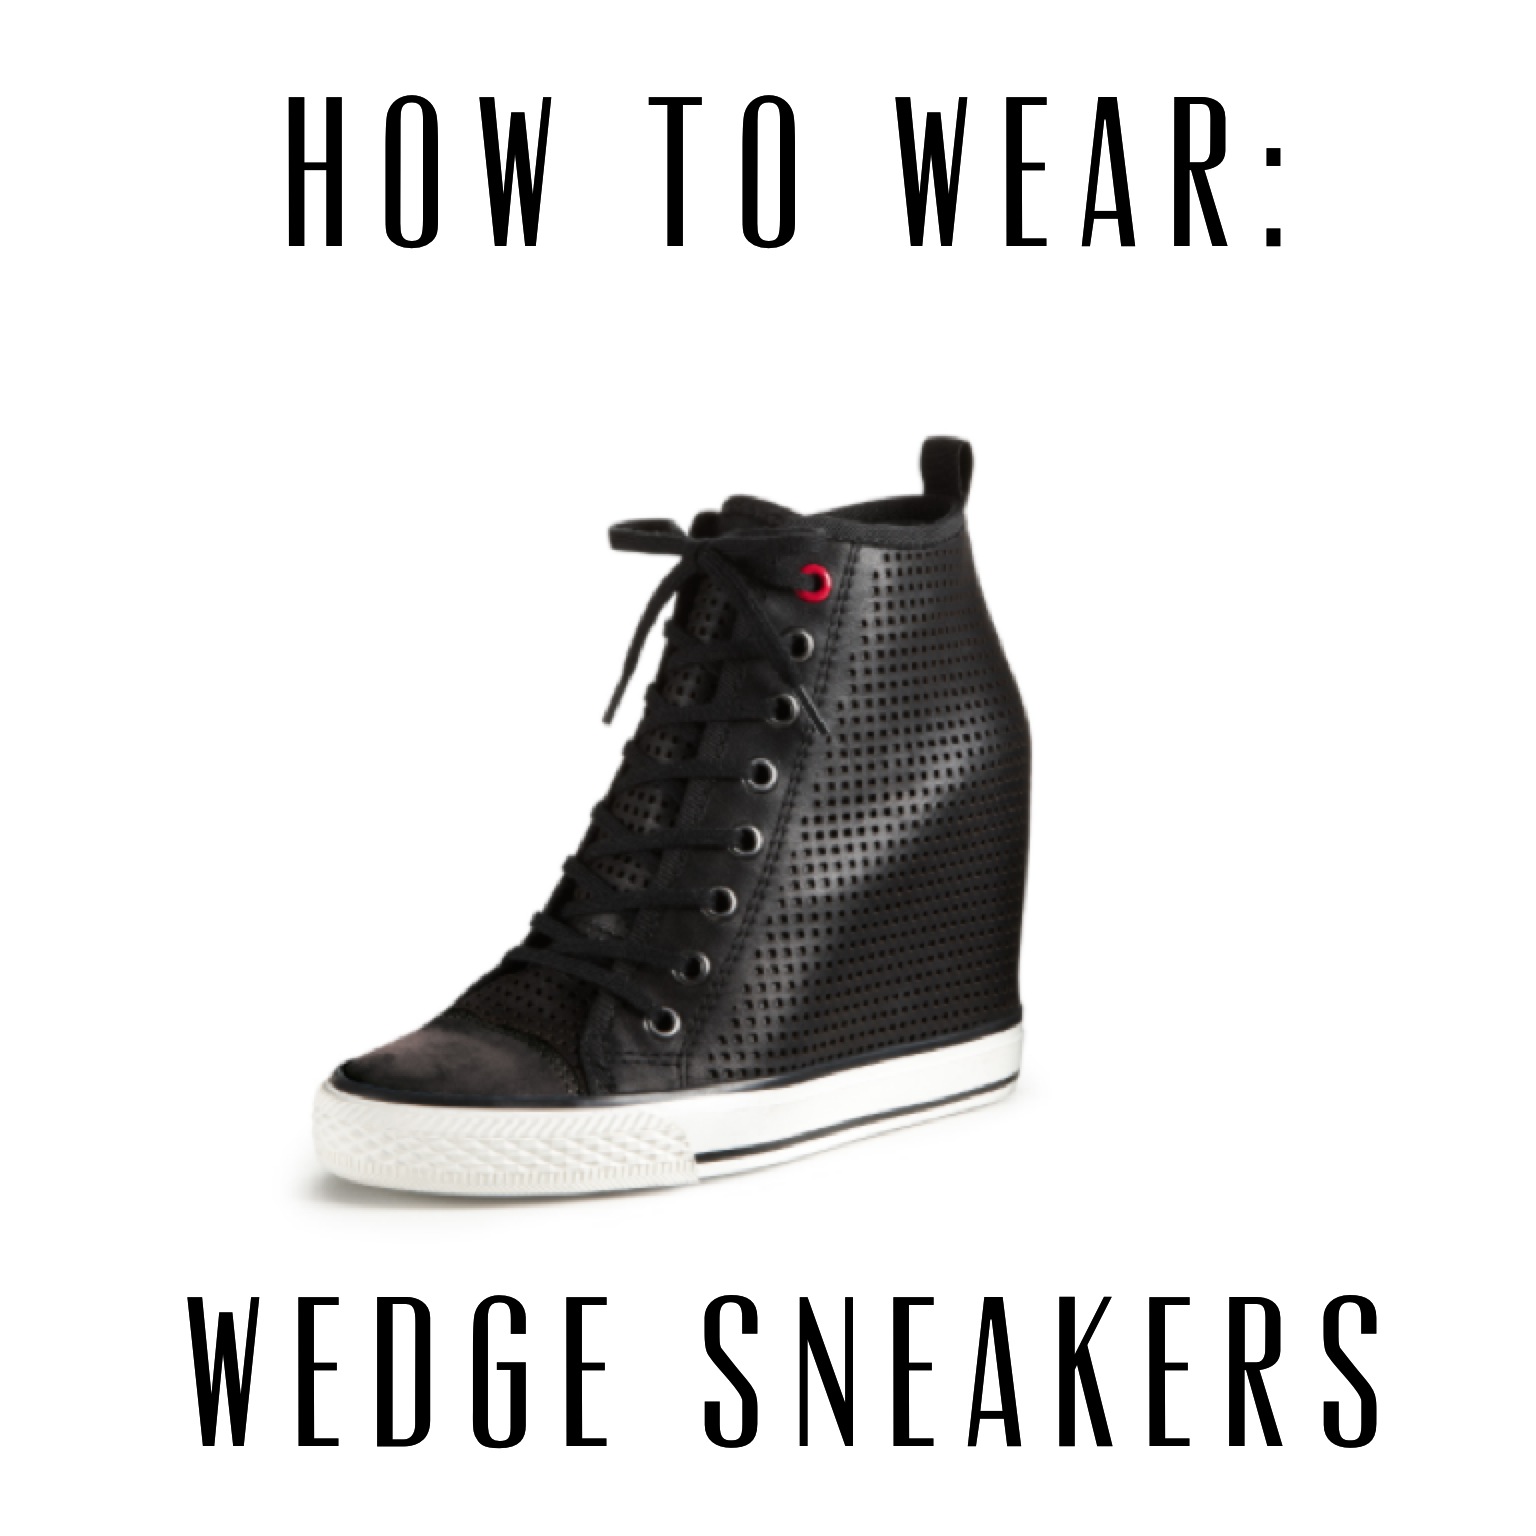 How To Wear: Wedge Sneakers